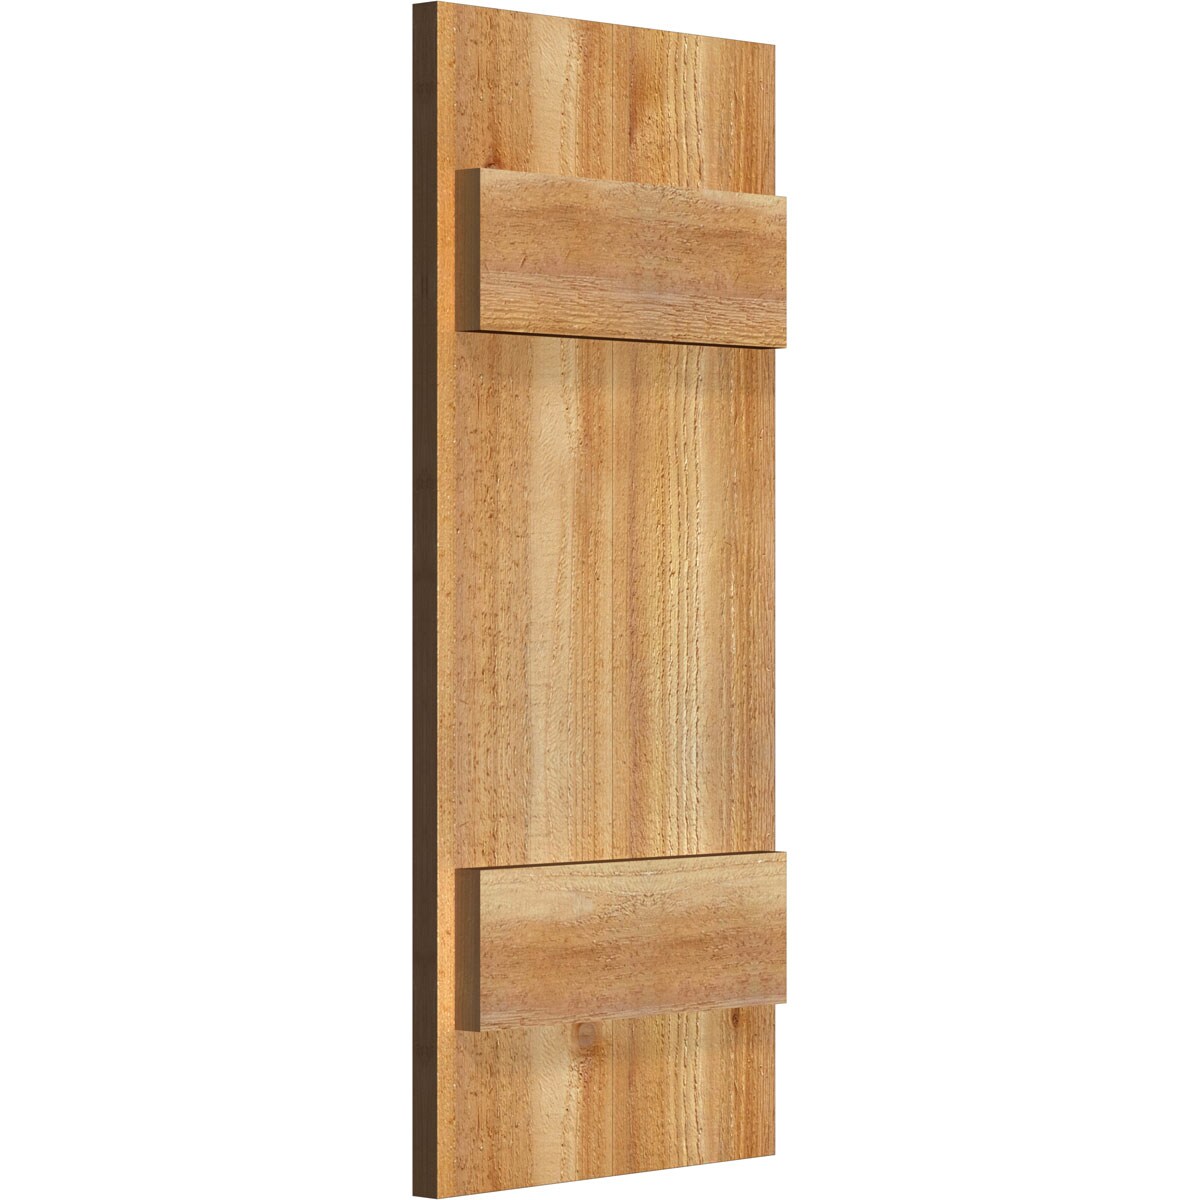 Ekena Millwork 2-Pack 10.75-in W x 25-in H Unfinished Board and Batten Wood Western Red cedar Exterior Shutters